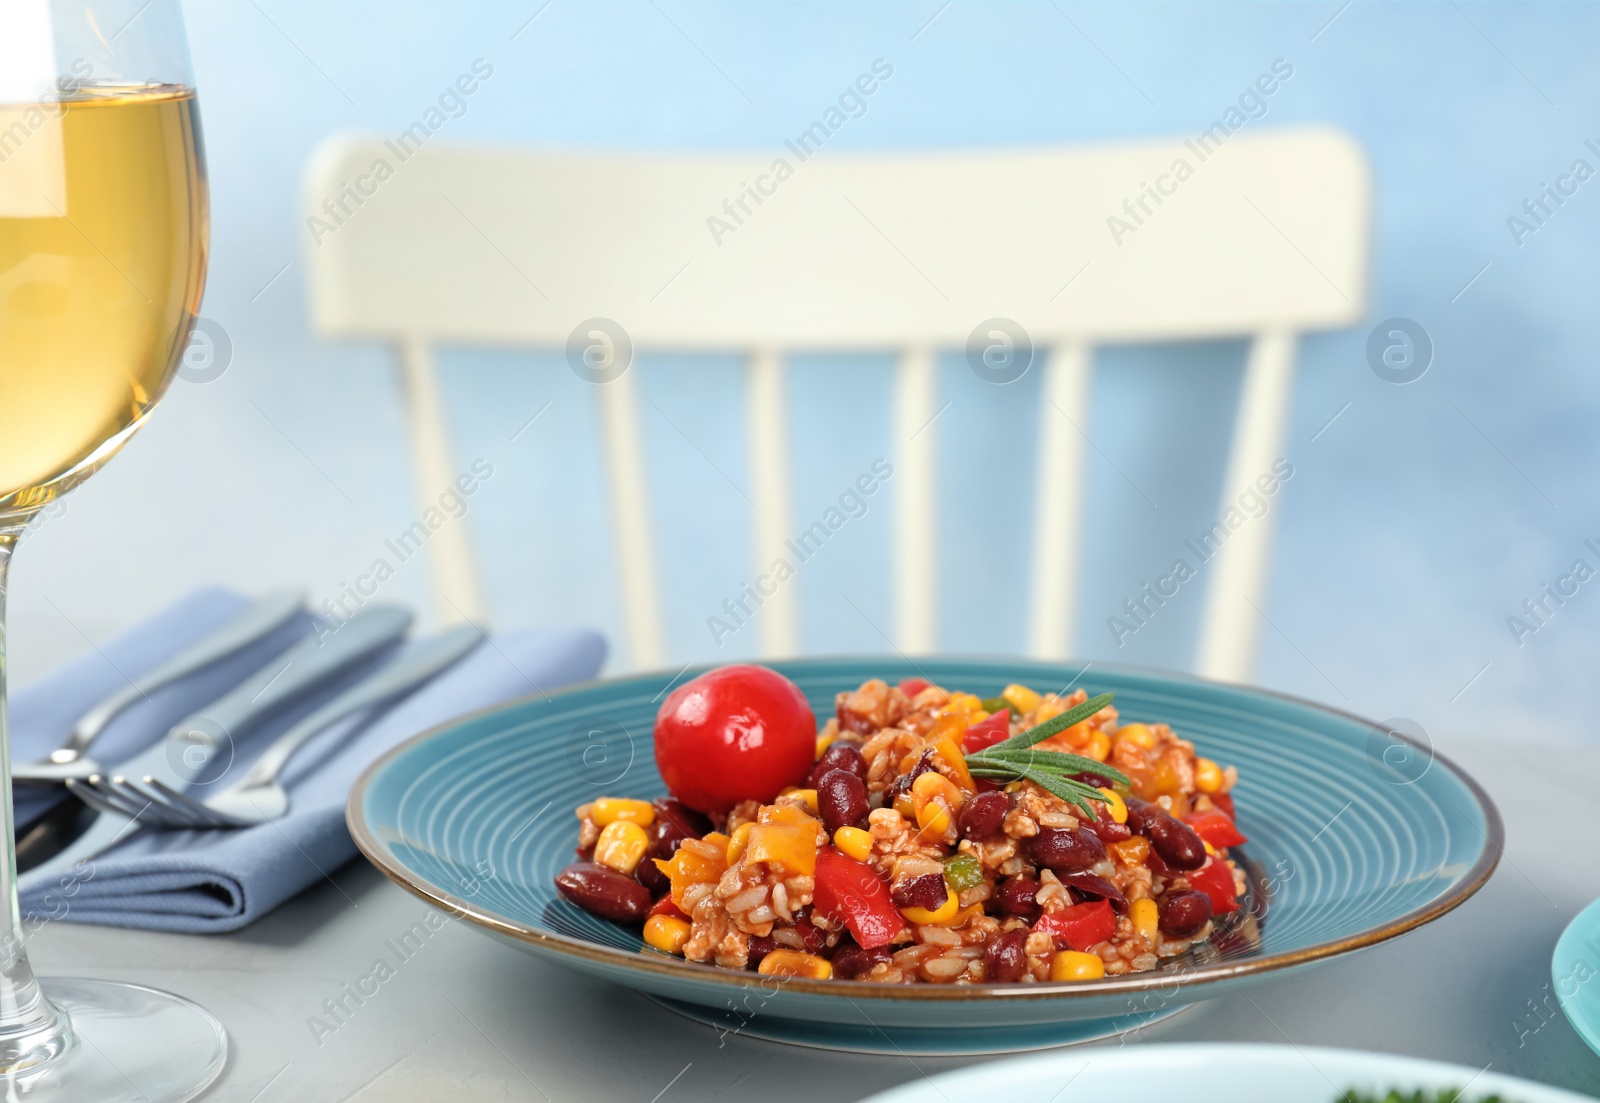 Photo of Plate with tasty chili con carne served on gray table